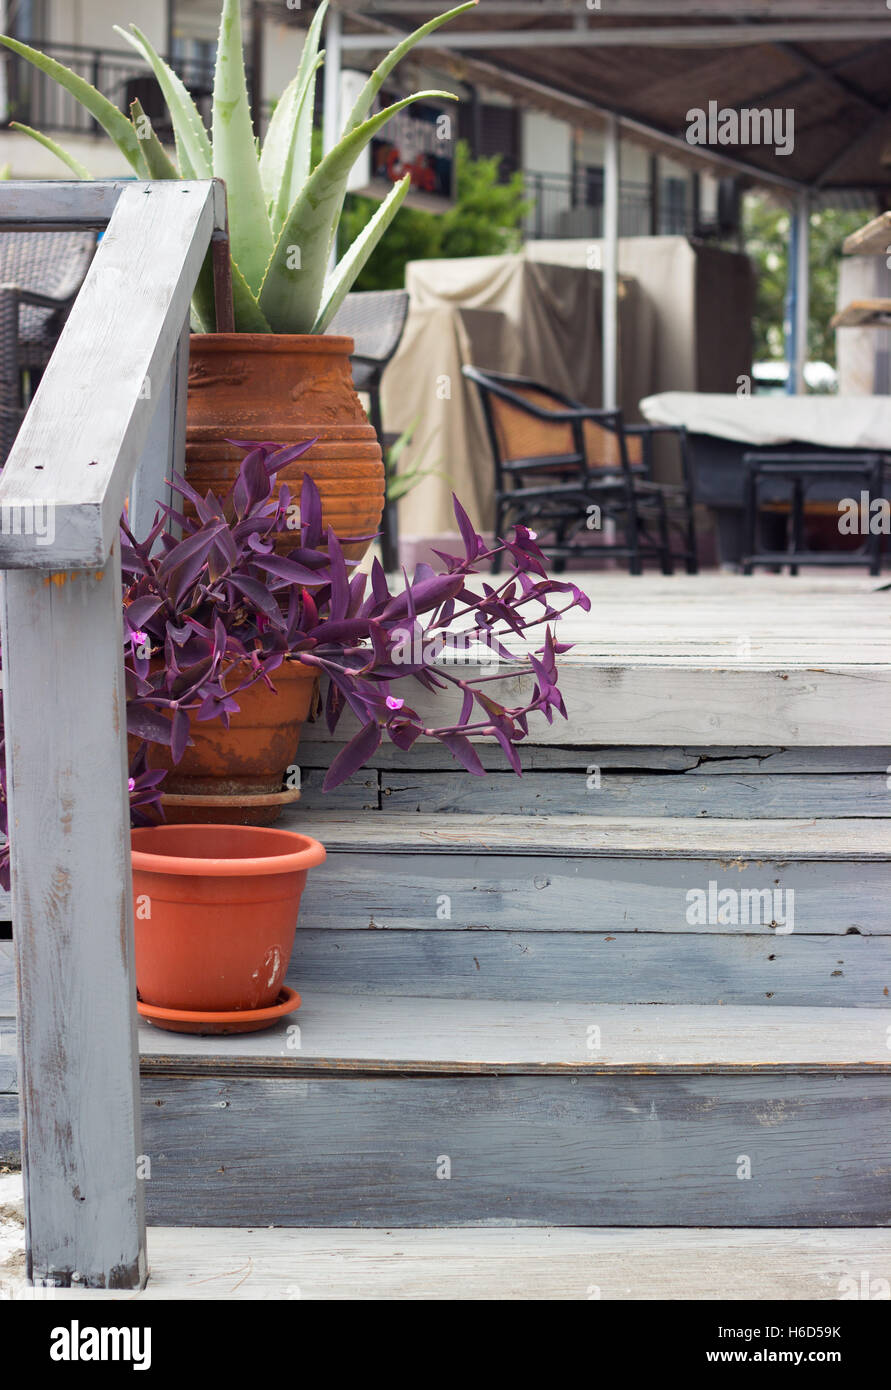 Detail of a aloe vera and purple heart plant in flowerpots on wooden stairs Stock Photo